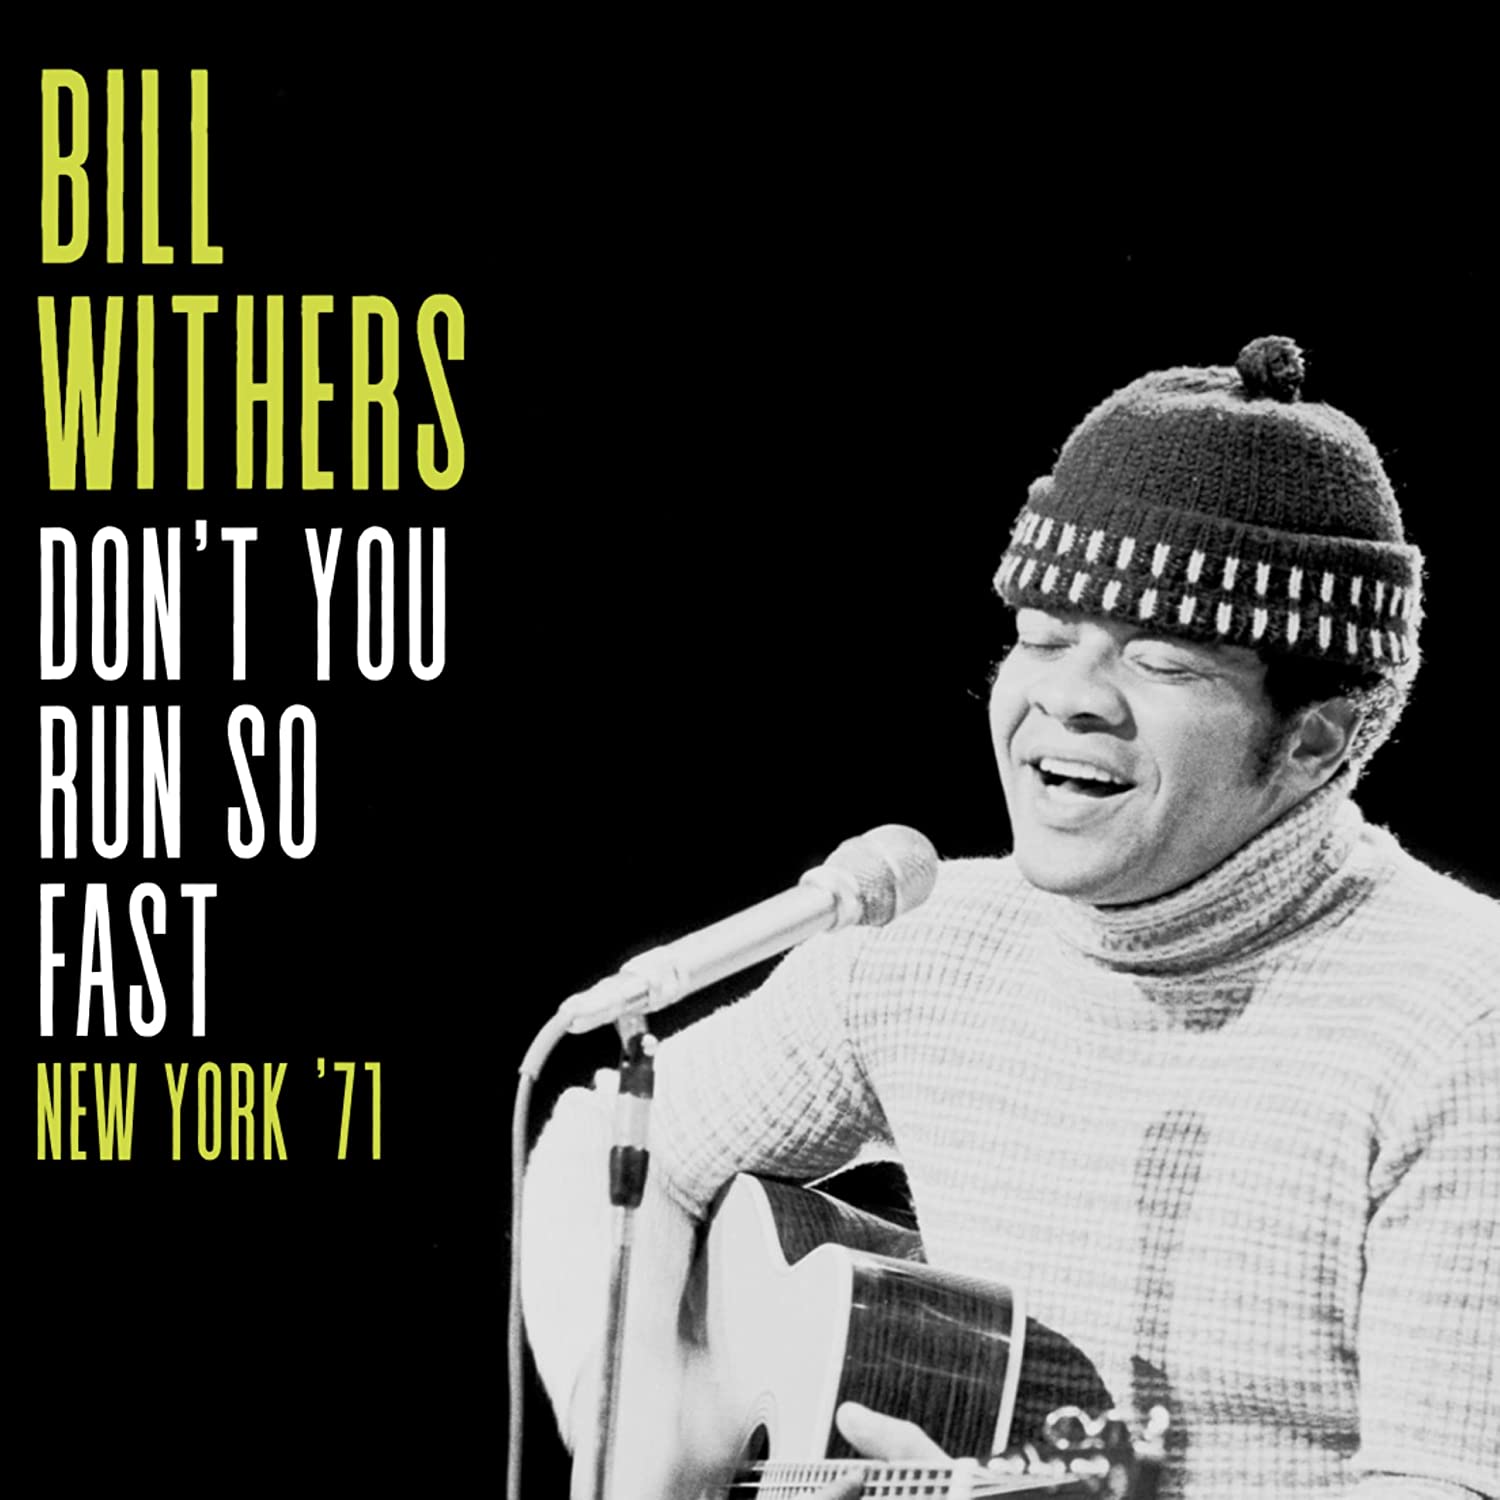 Don't You Run So Fast, New York '71